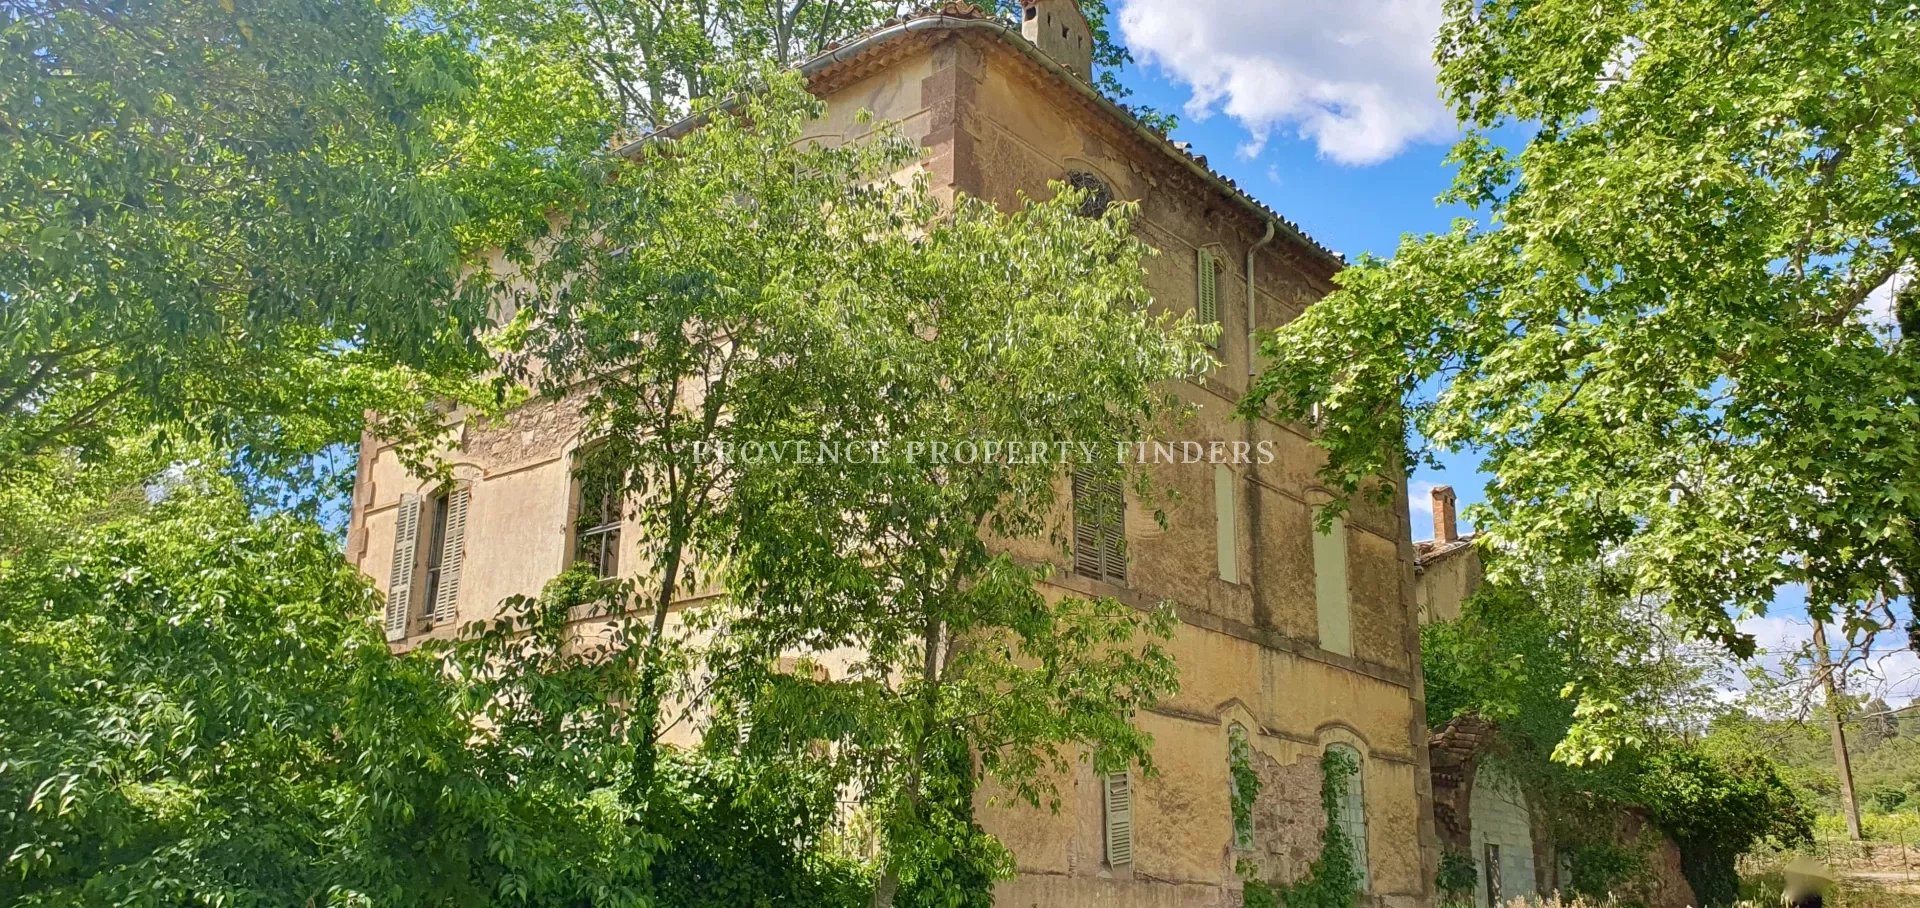 Le Cannet des Maures, old chateau to be renovated.